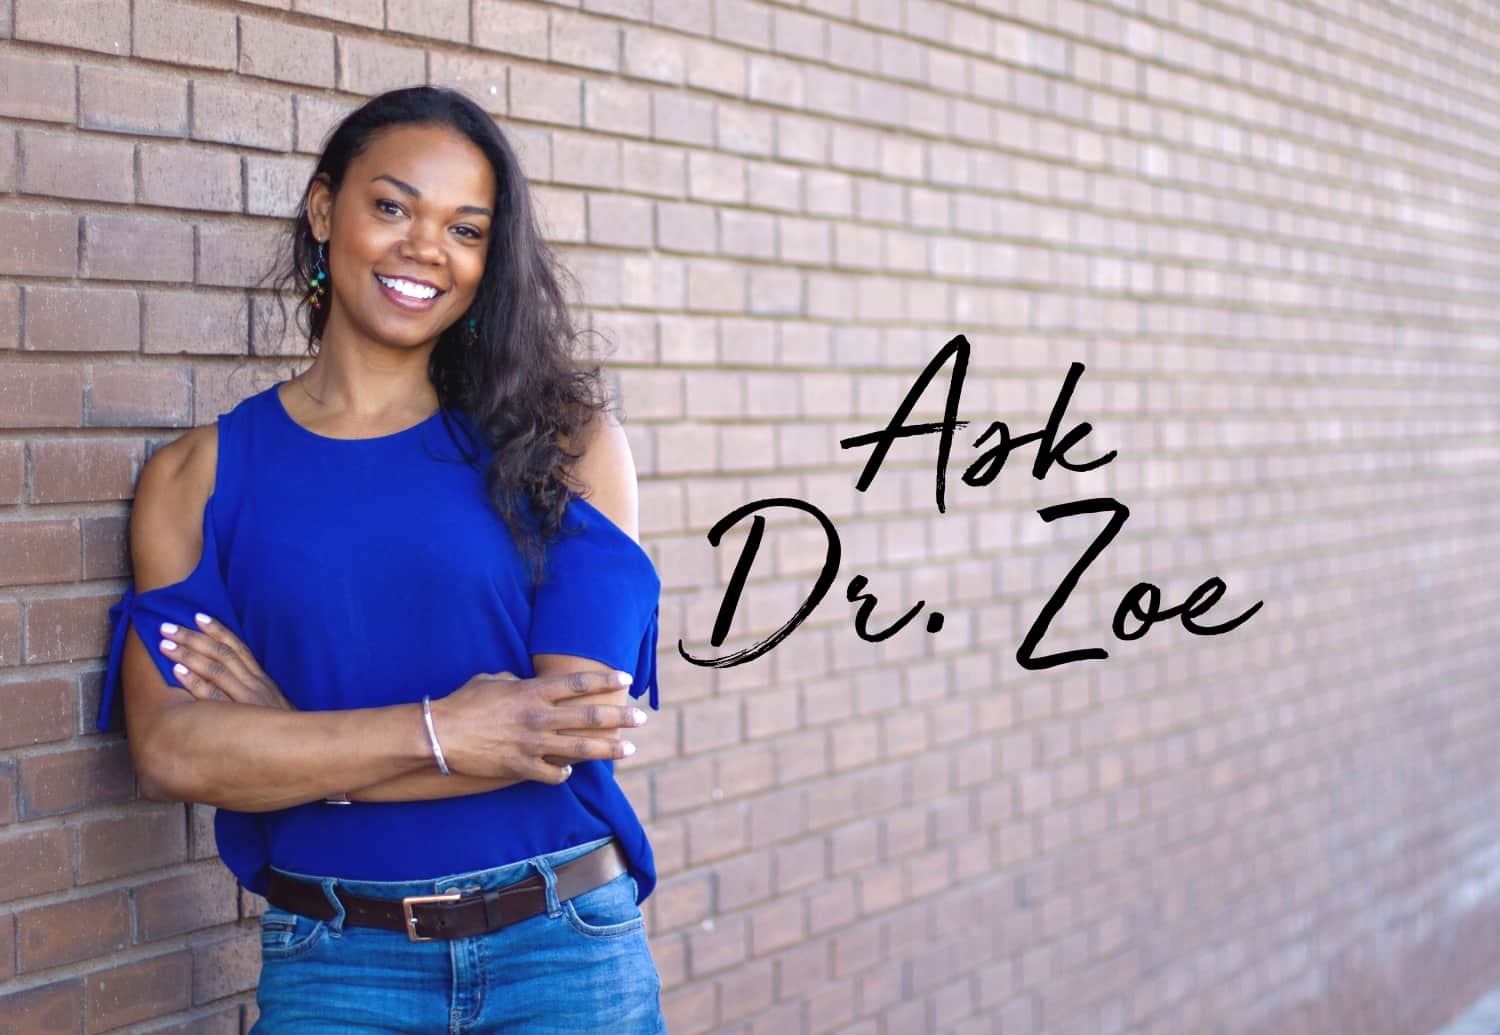 Ask Dr. Zoe - My Abusive Husband Received Clinical Help; Should I Go Back to Him?